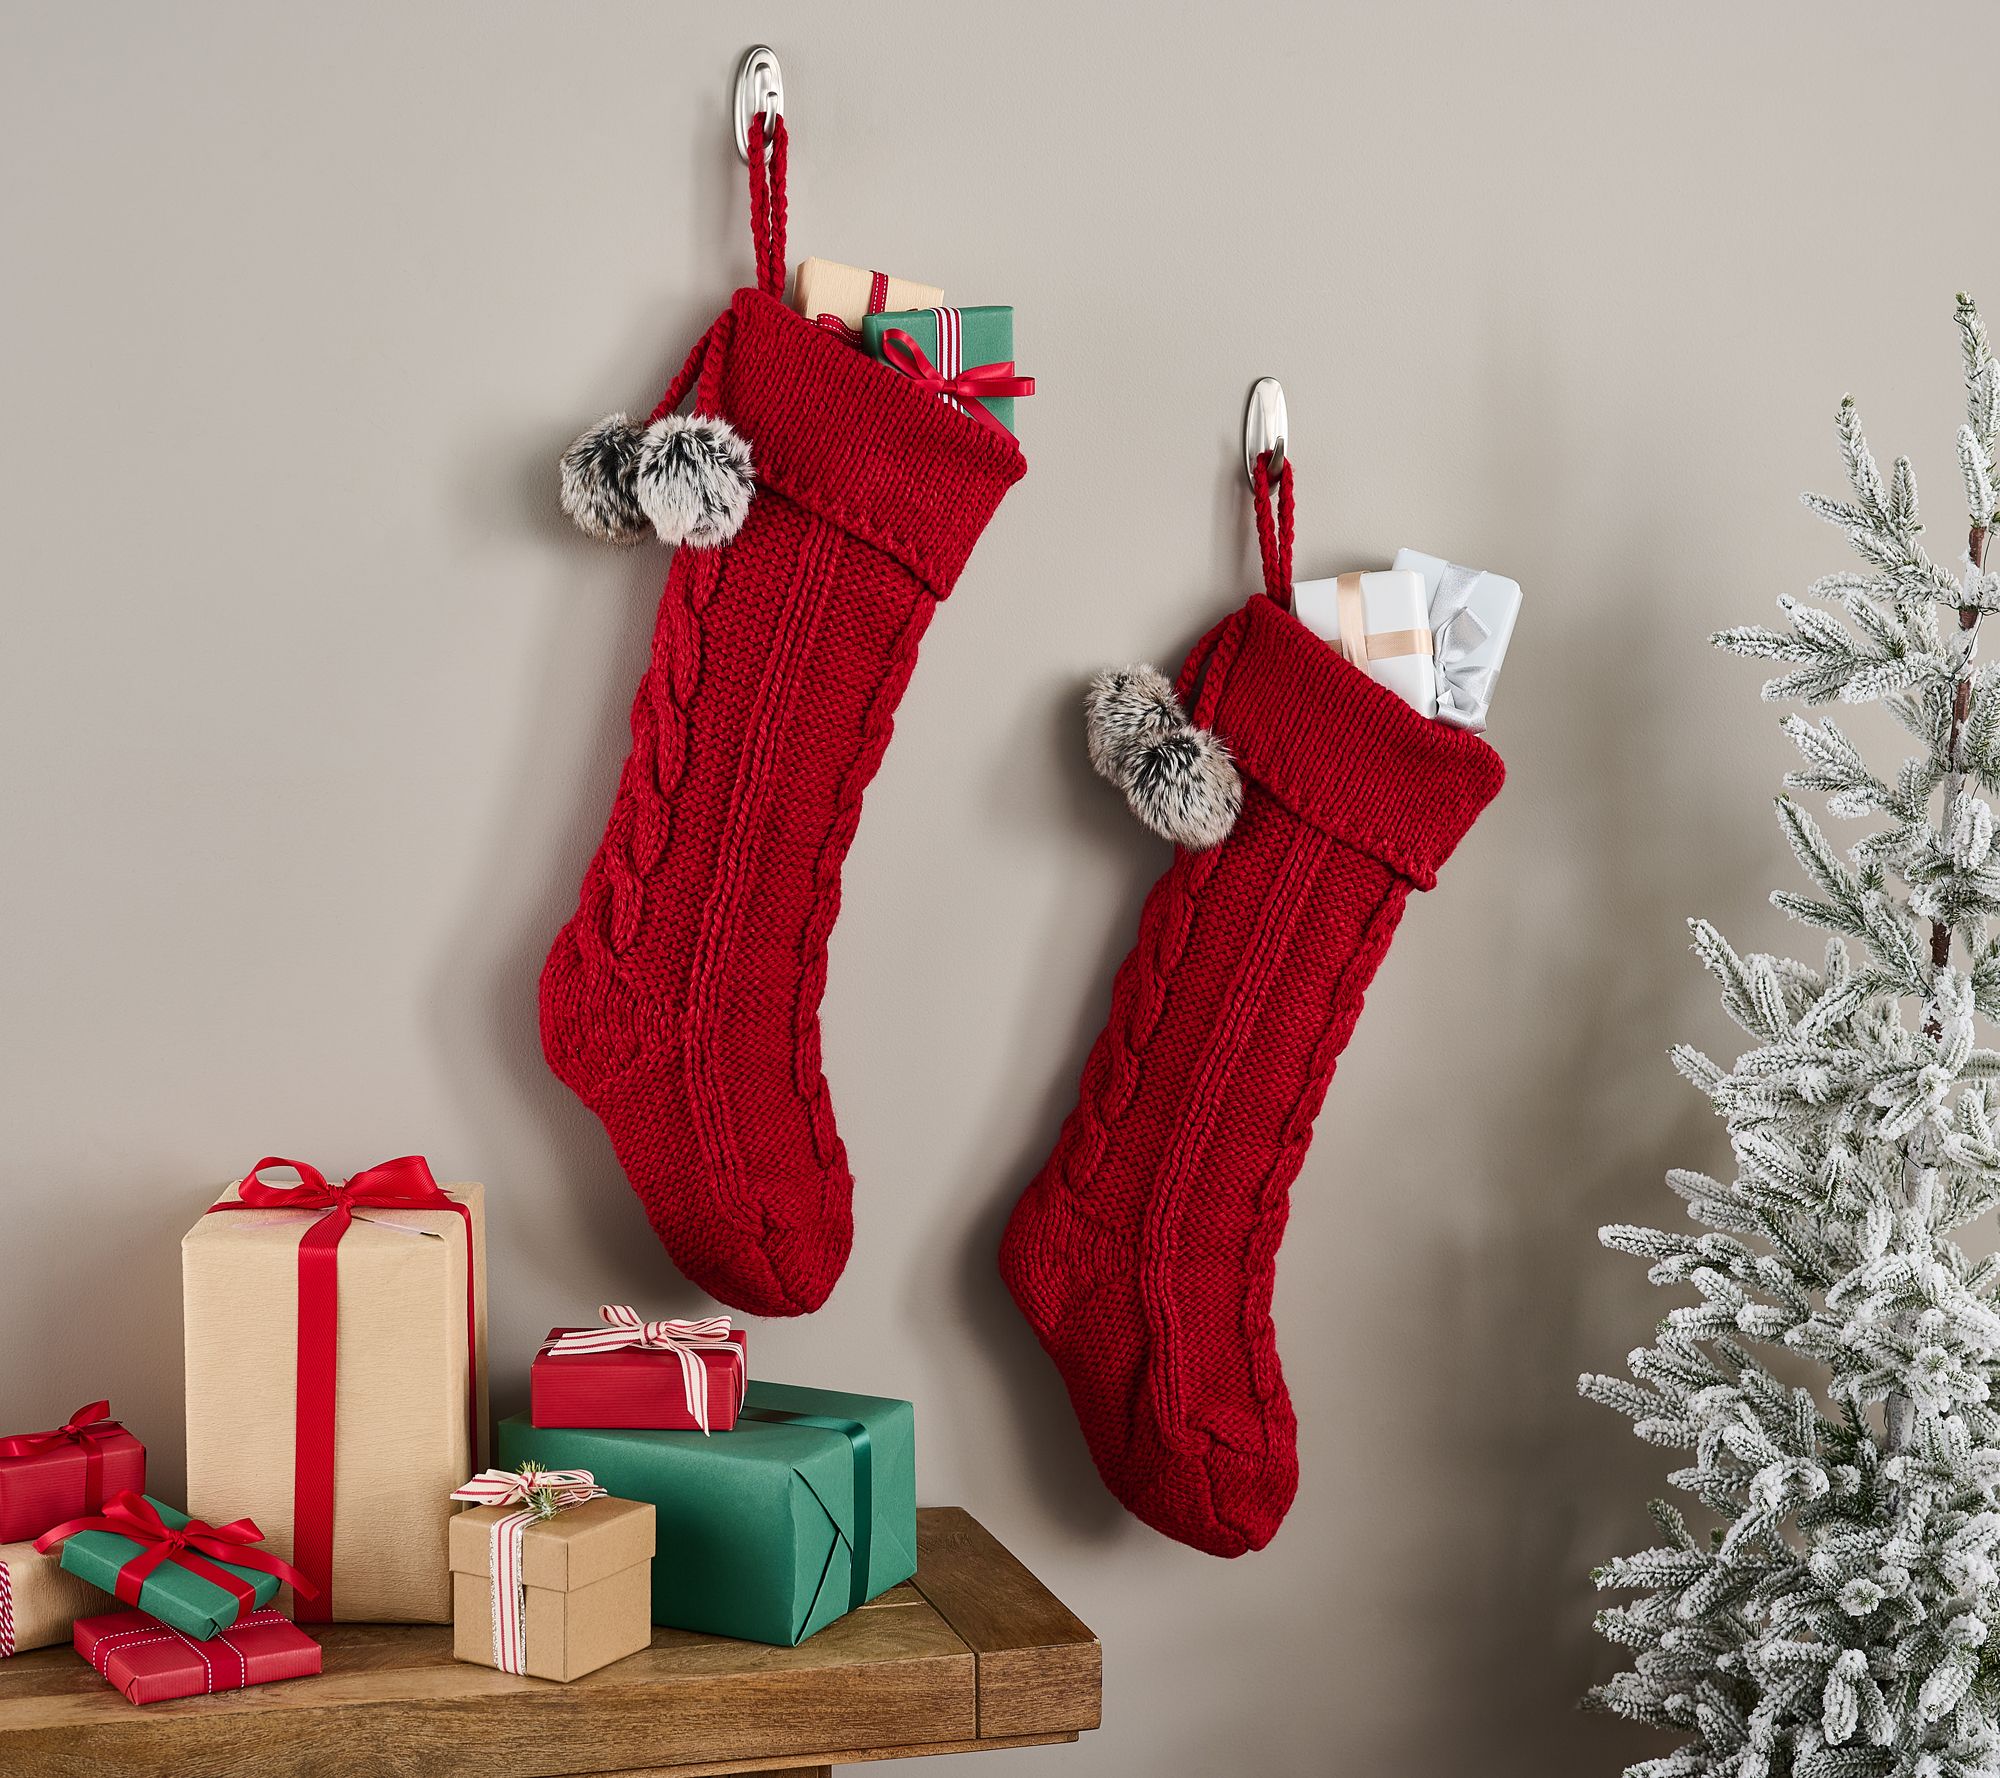 READY 2 LEARN Christmas Crafts - Create Your Own Christmas Stockings - Set  of 4 - Christmas Decorations for Home - All Materials Included